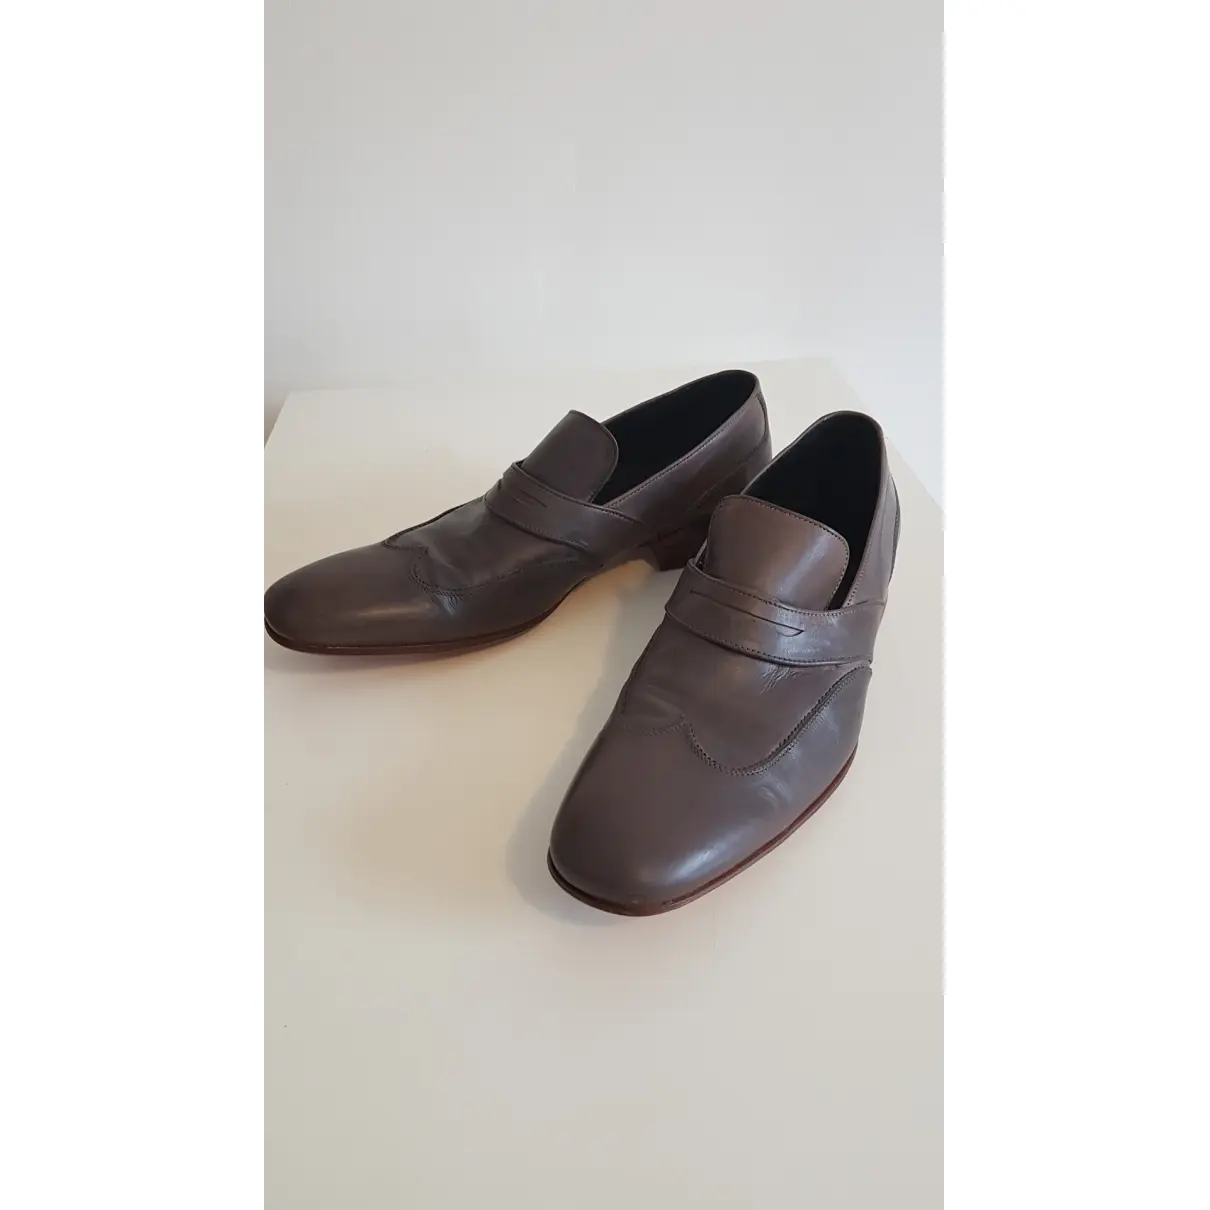 N.D.C. Made by Hand Leather flats for sale